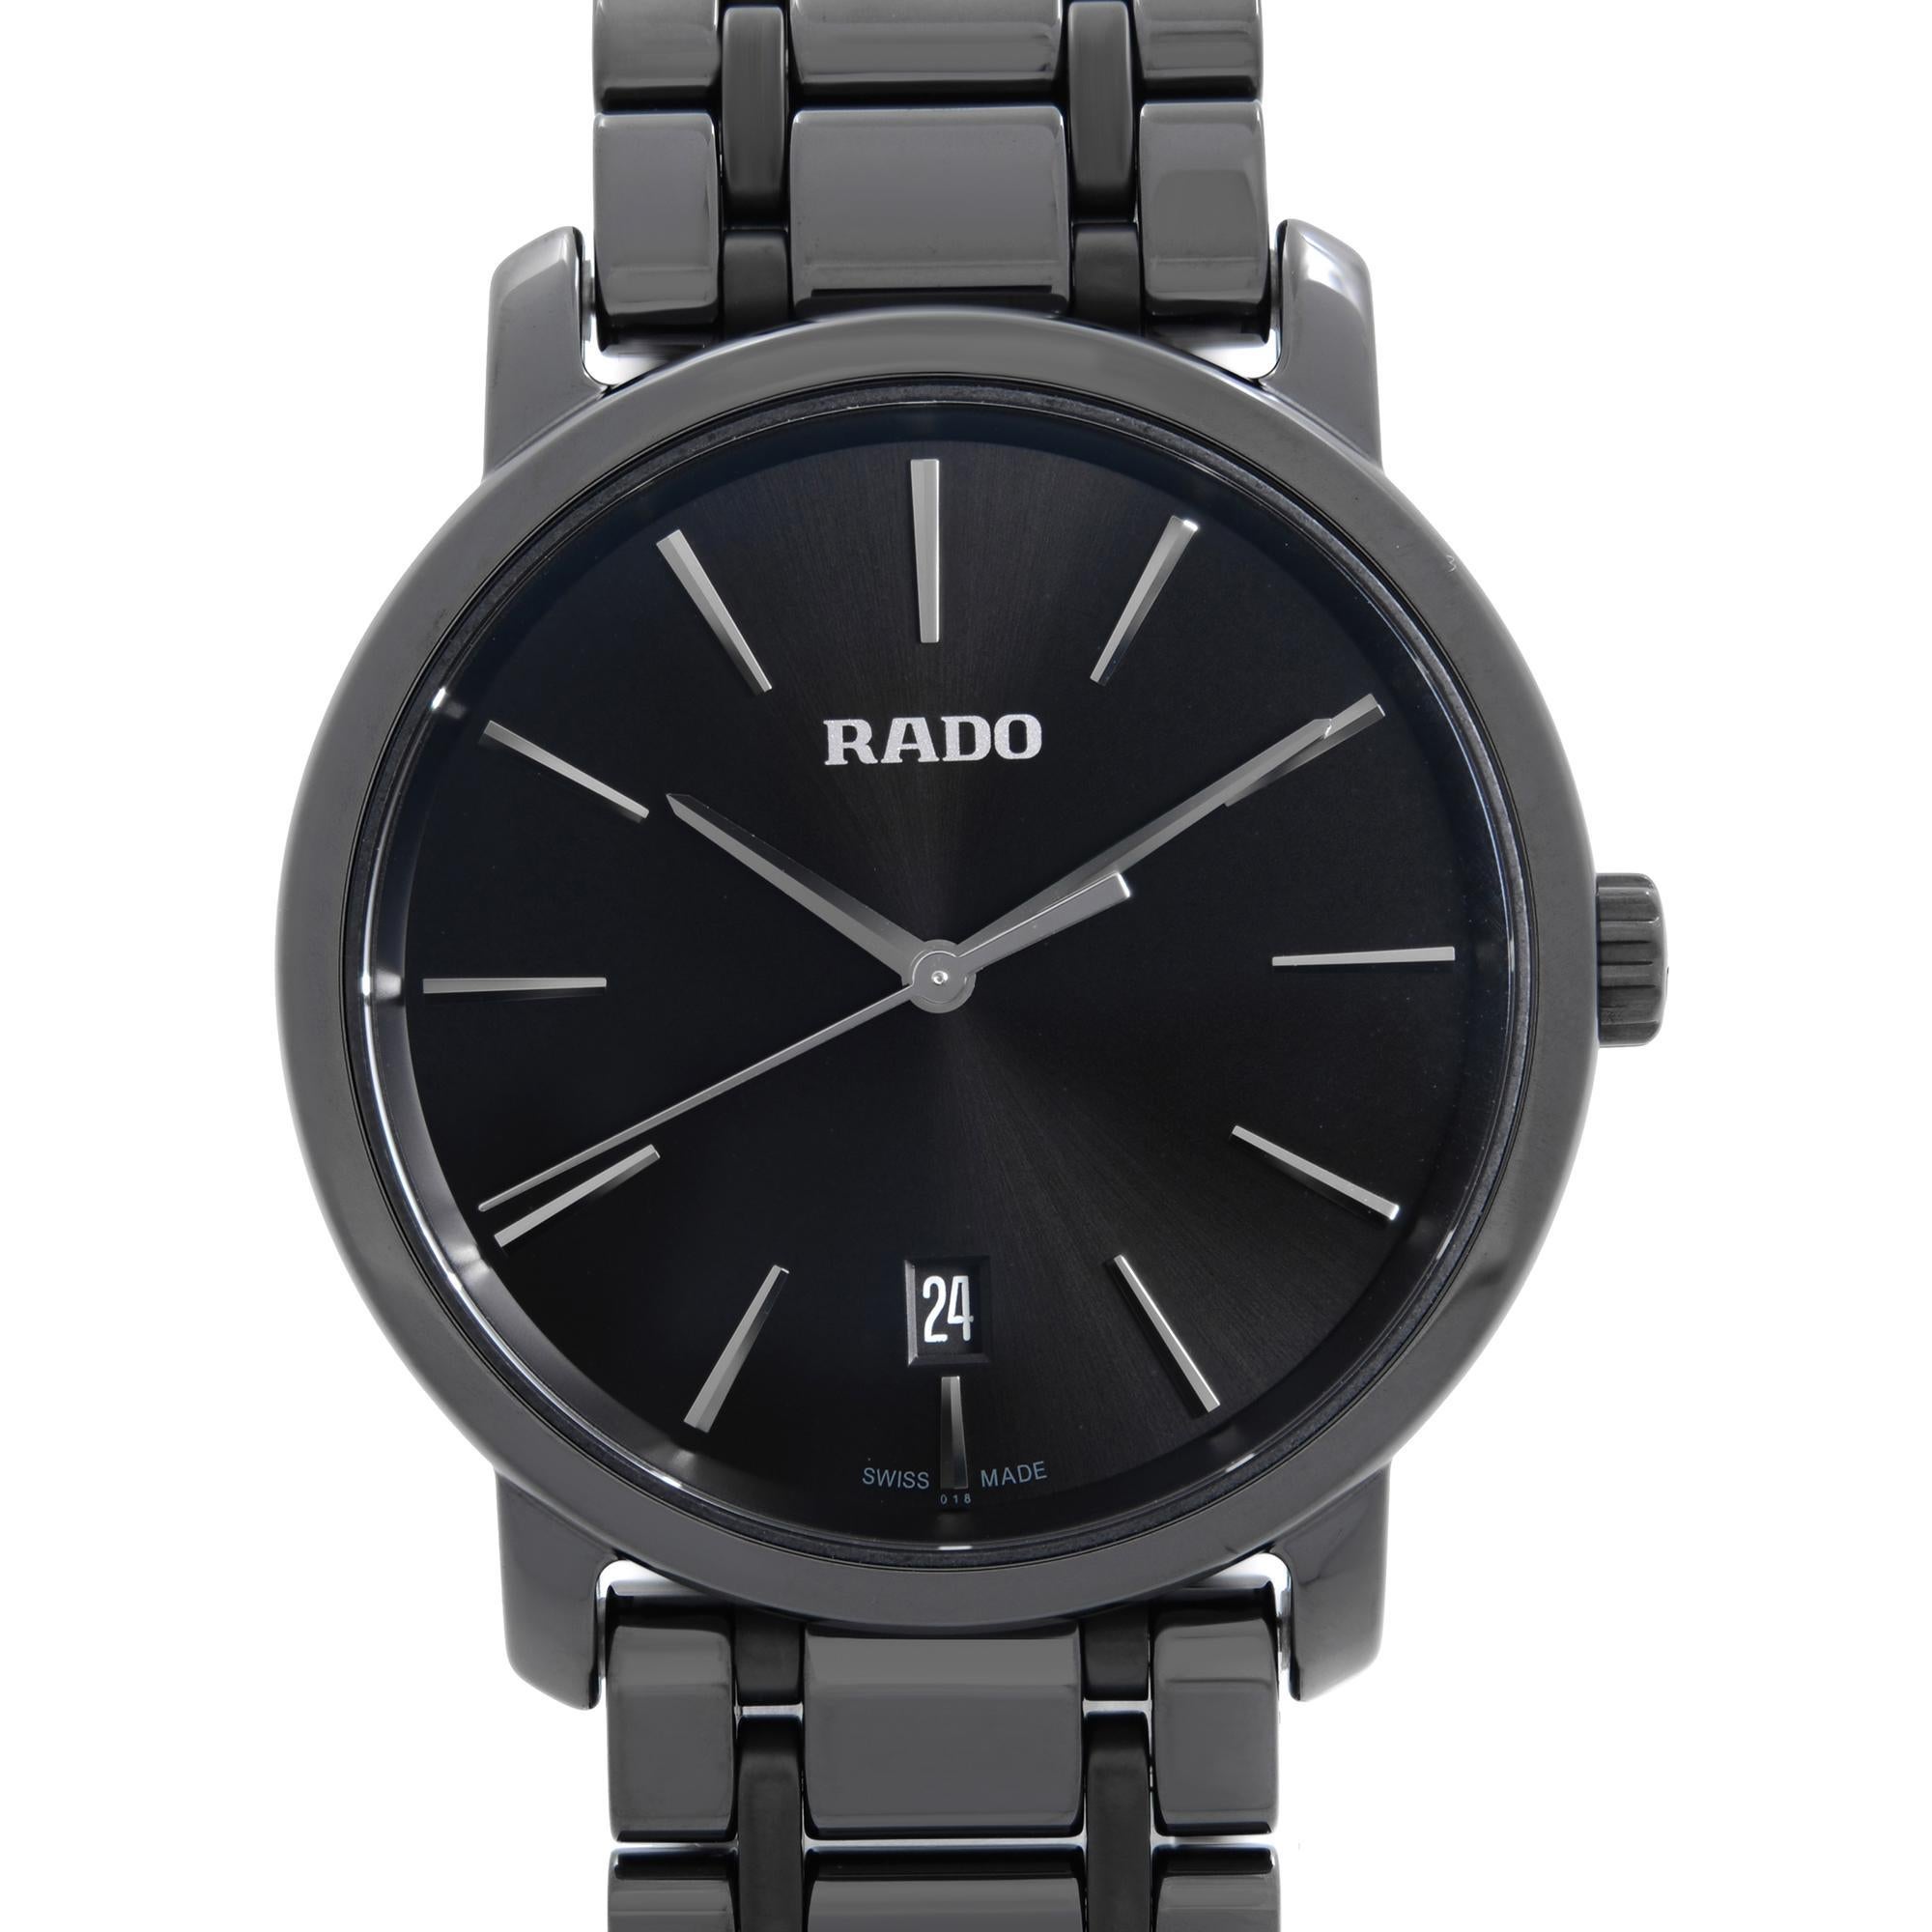 Unworn Rado Diamaster 40mm Quartz Men's Watch R14066182. This Beautiful Men's Timepiece is Powered by a Quartz (Battery) Movement and Features: a Black Ceramic Case and Bracelet, Black Dial with Silver-Tone Hands and Index Hour Markers. Date Display